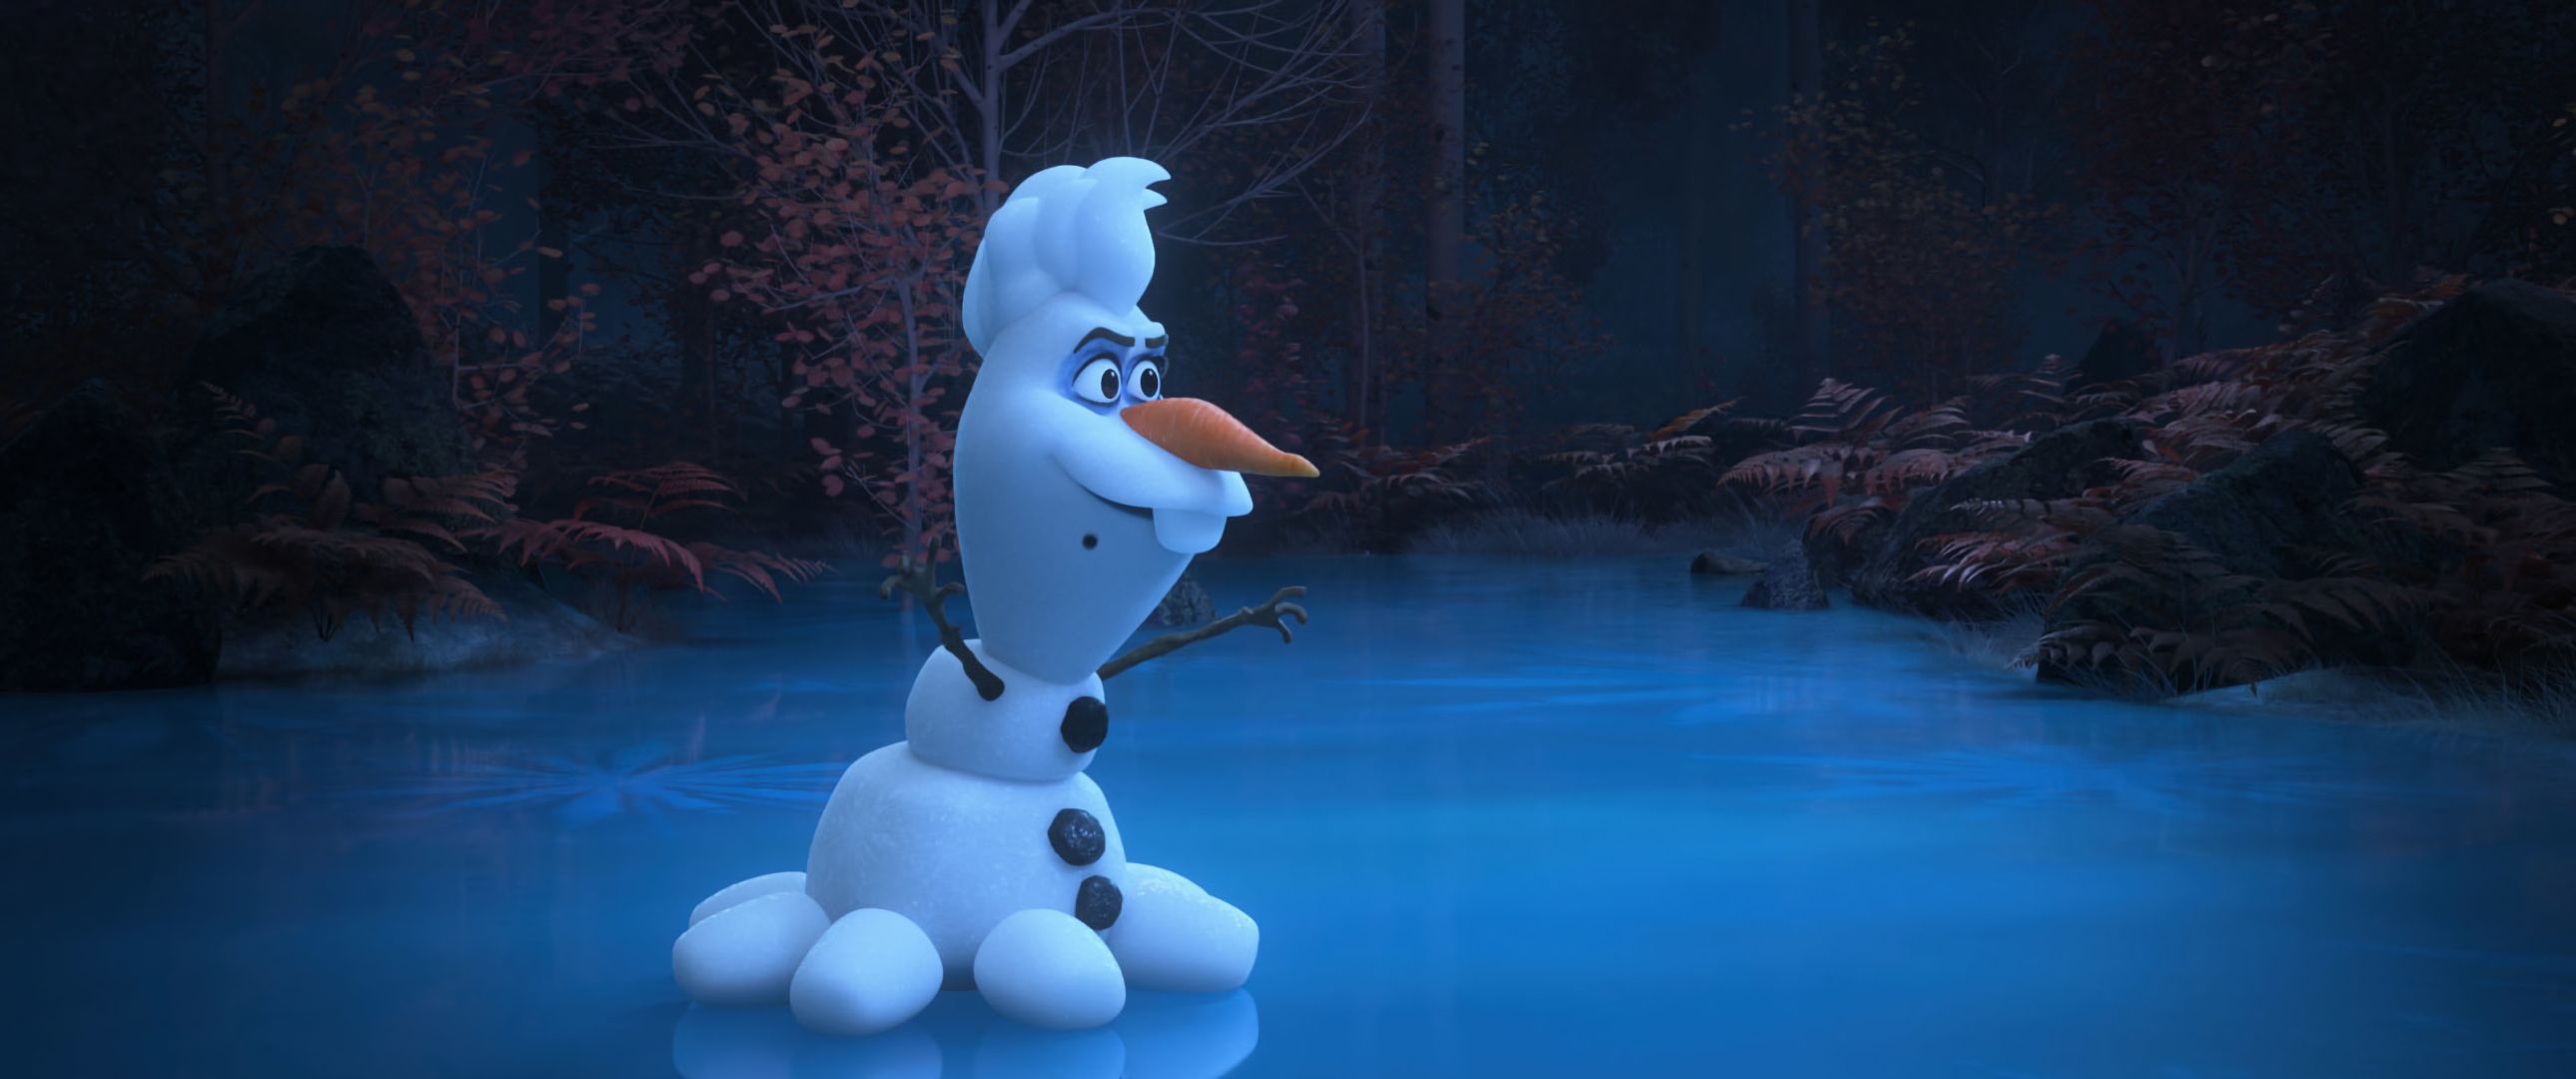 tv show, olaf presents, olaf (frozen)